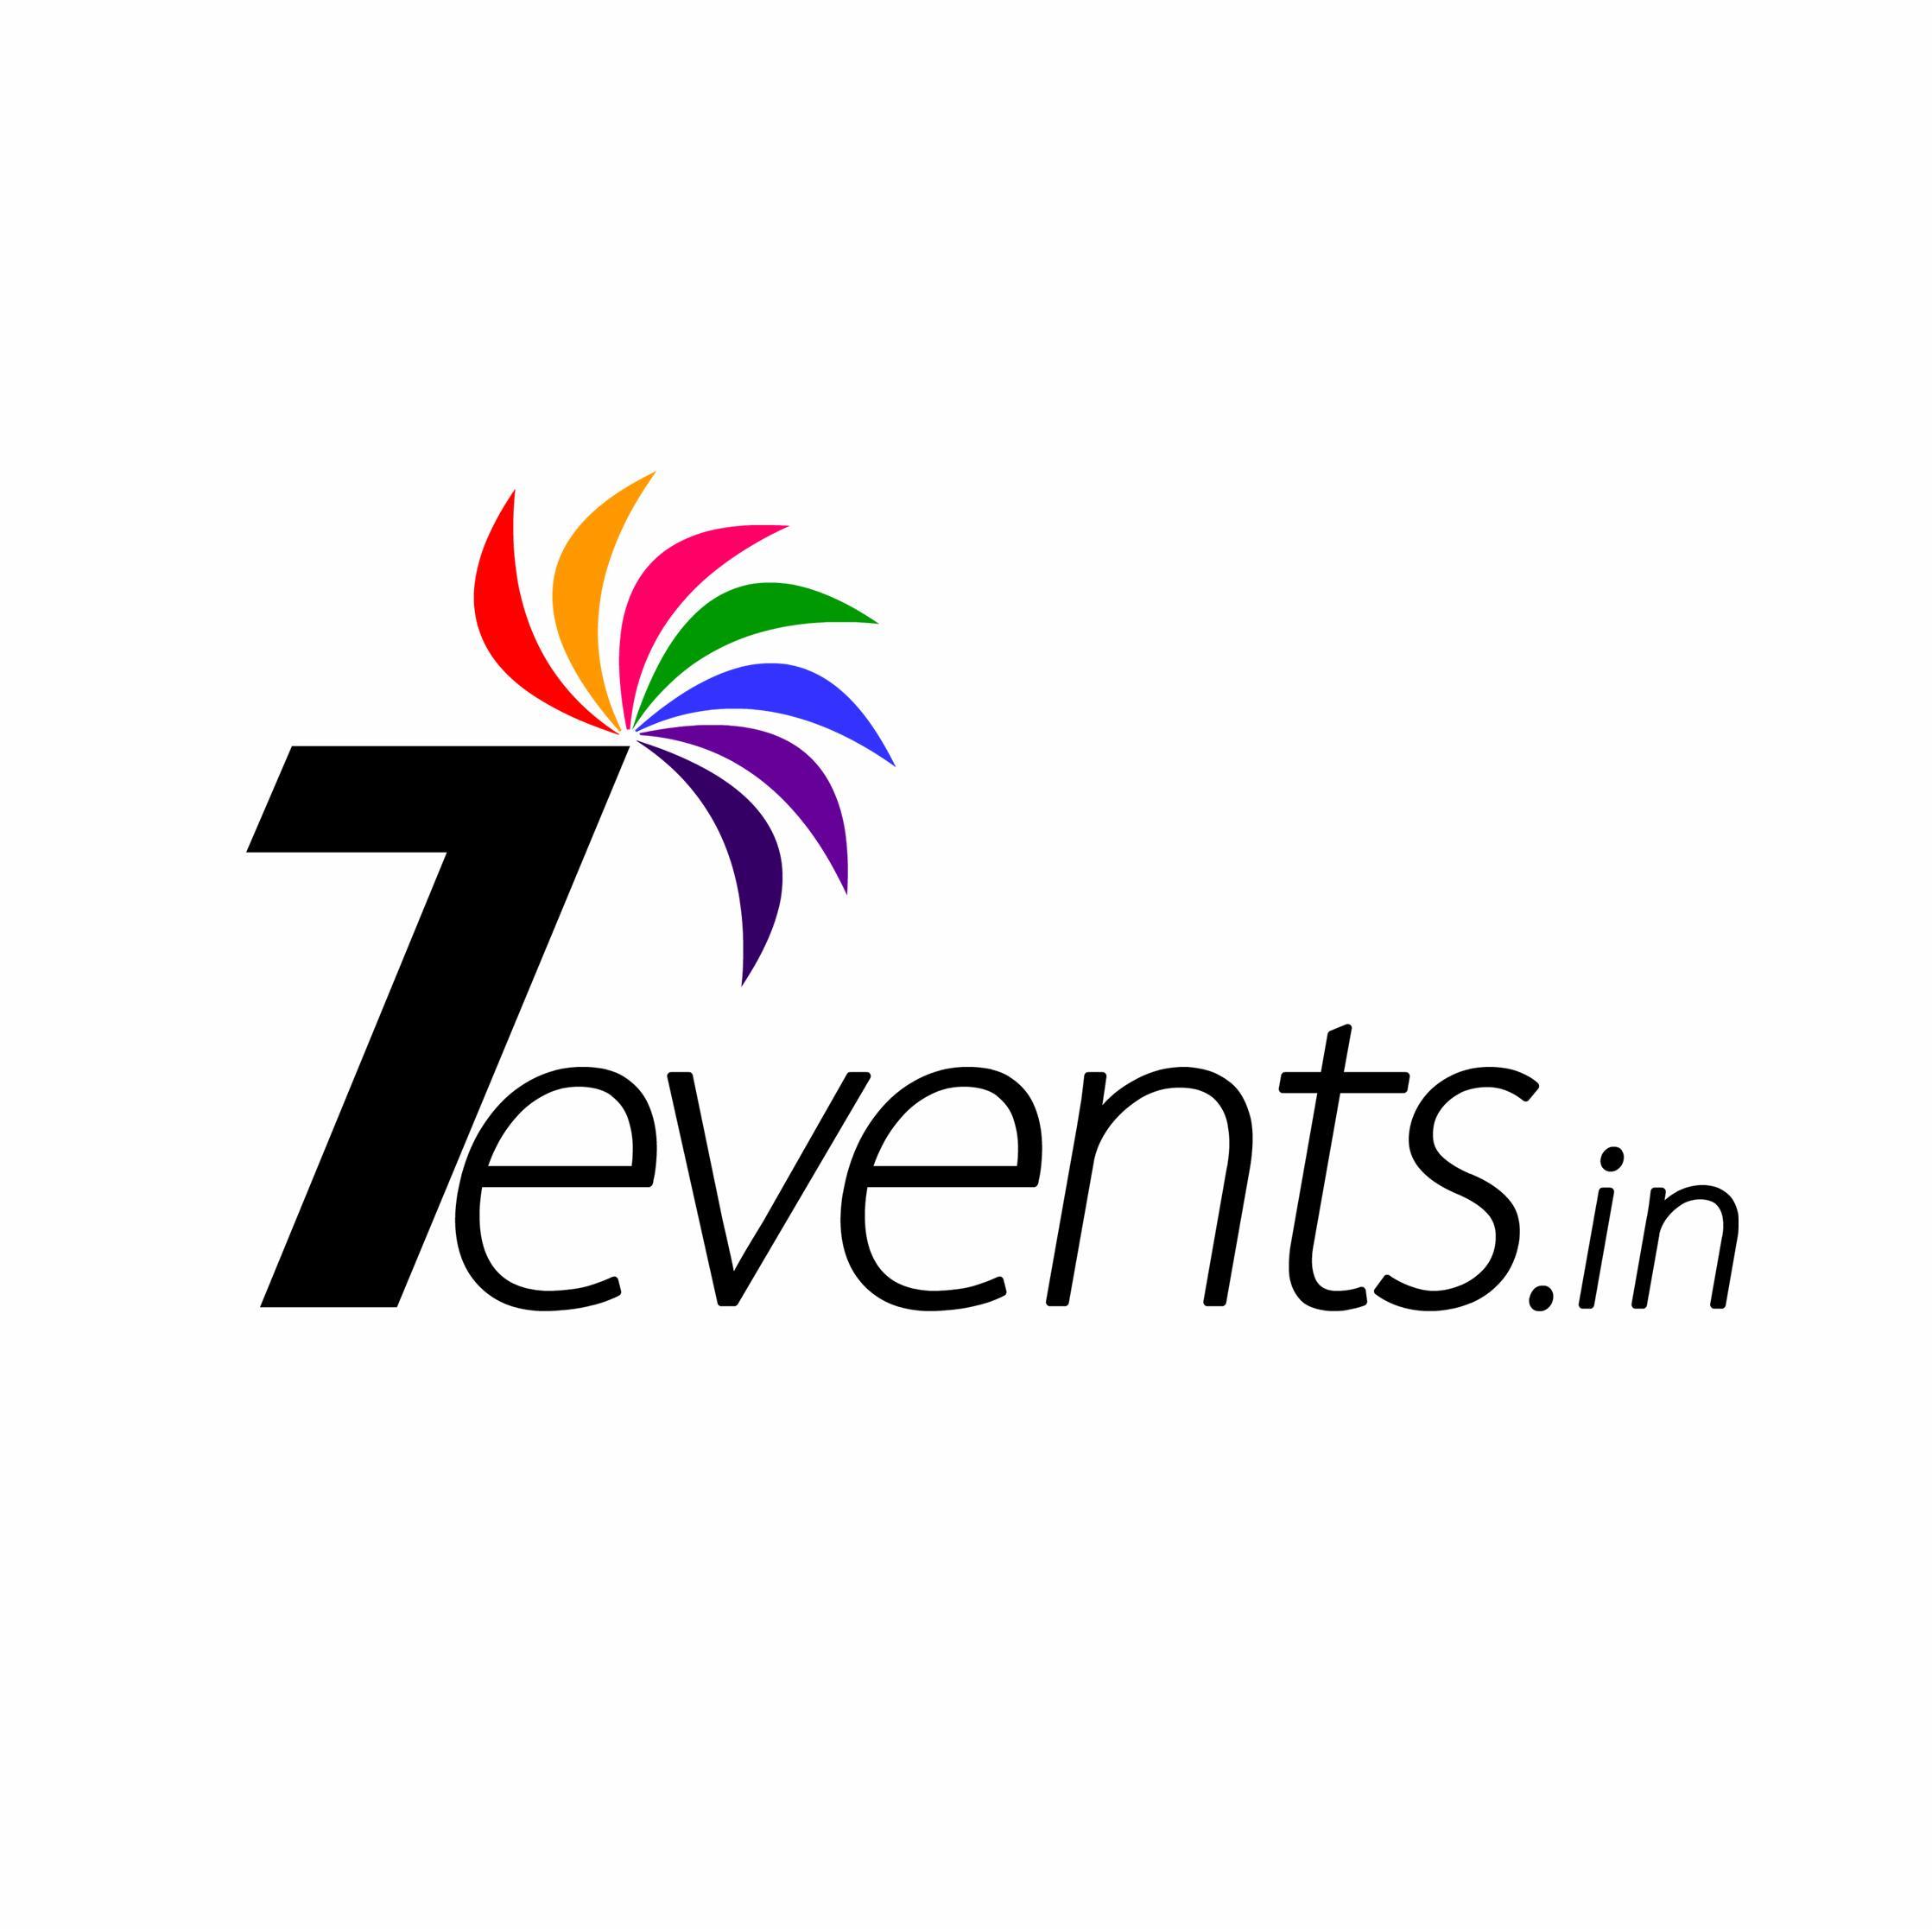 7events